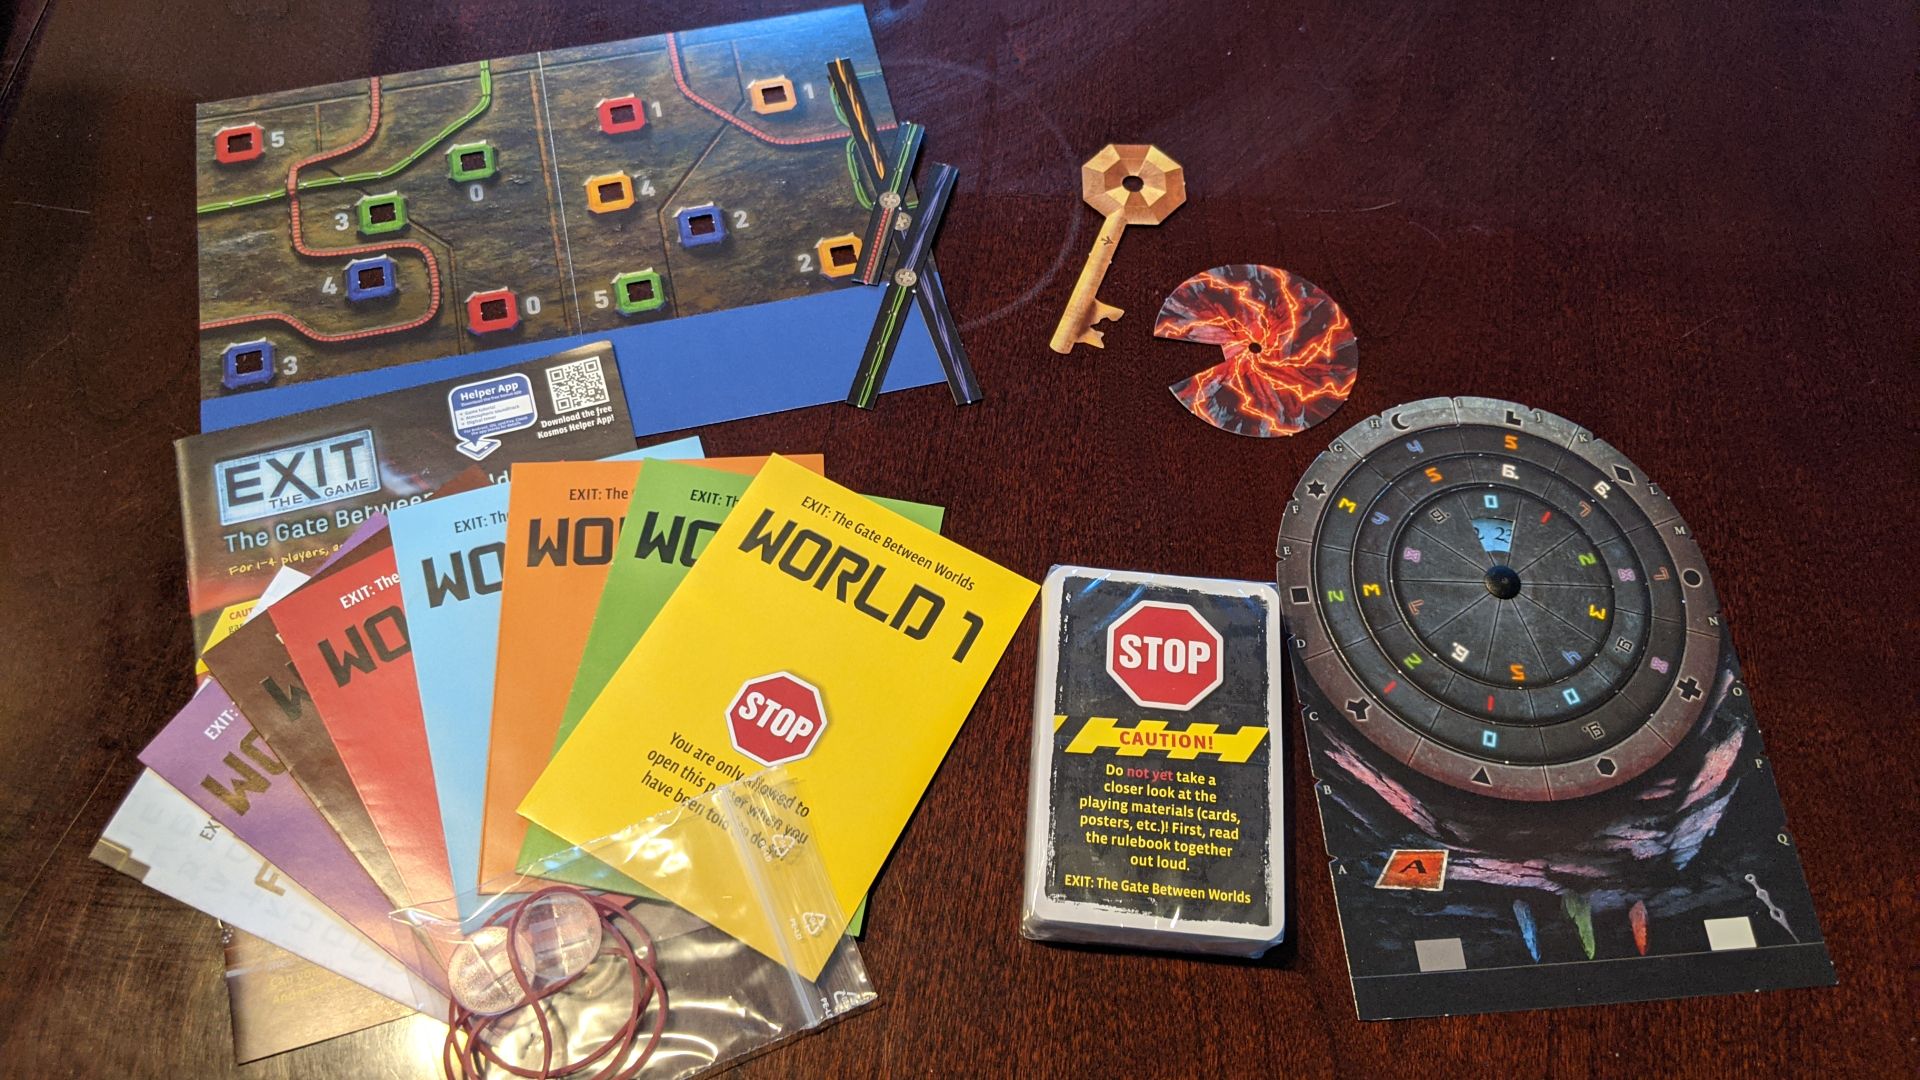 Exit The Gate Between Worlds Game Contents